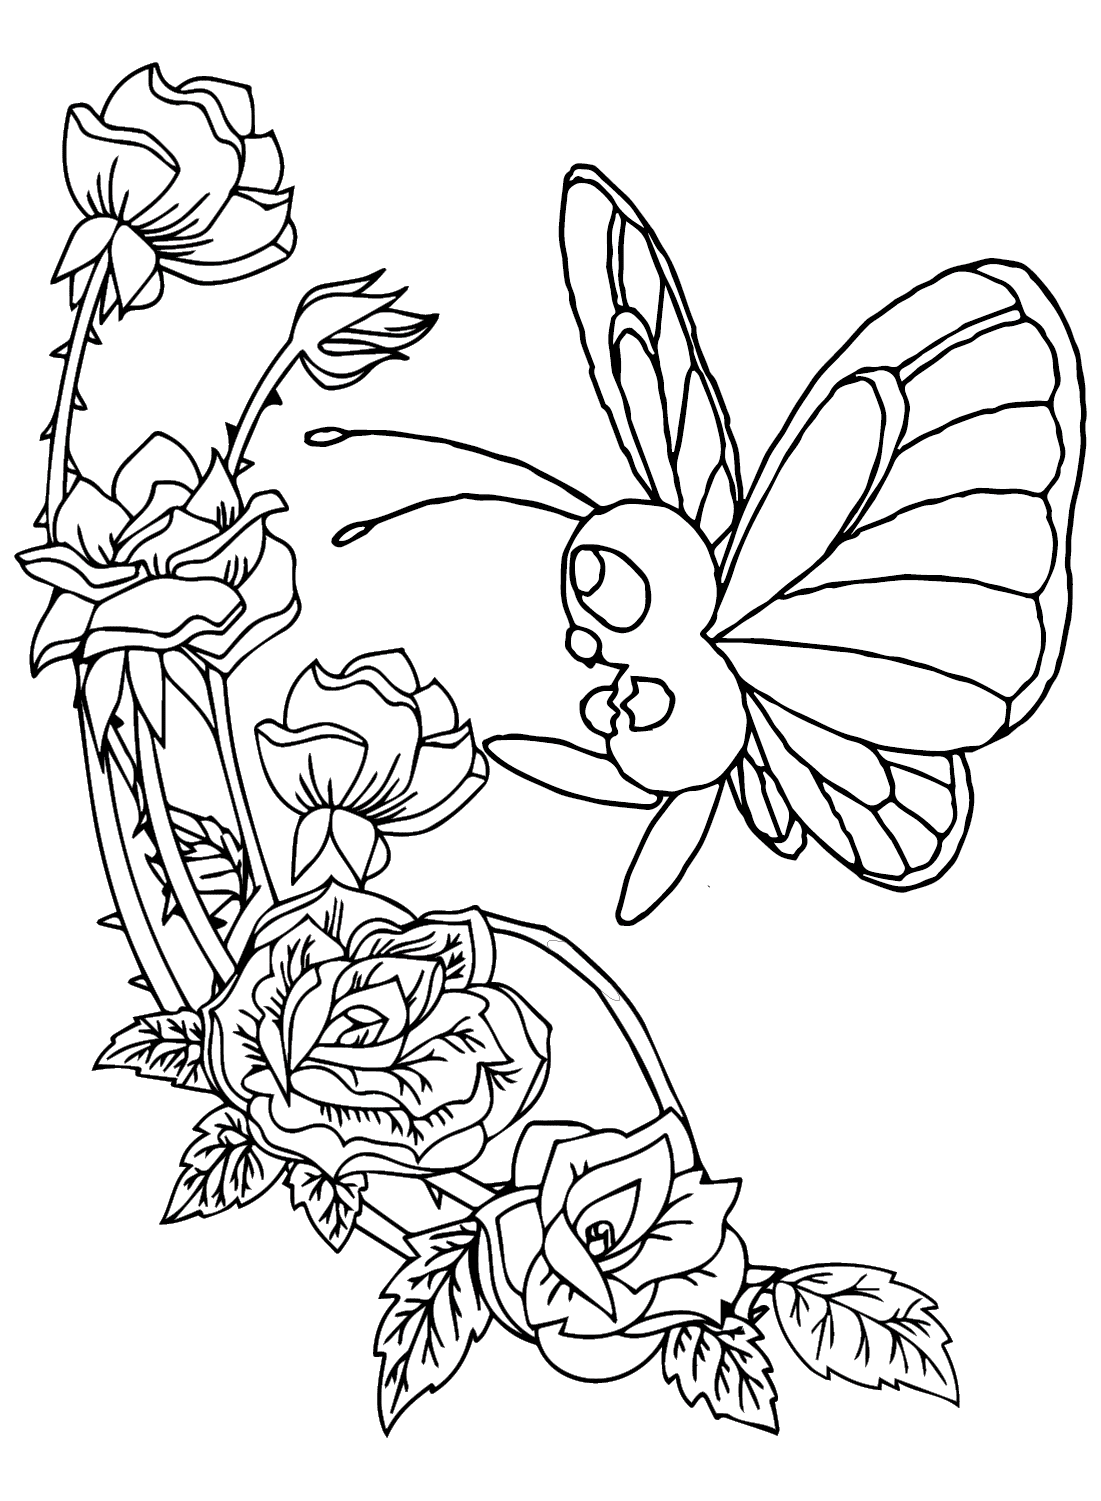 Butterfree Coloring Pages to Download from Butterfree